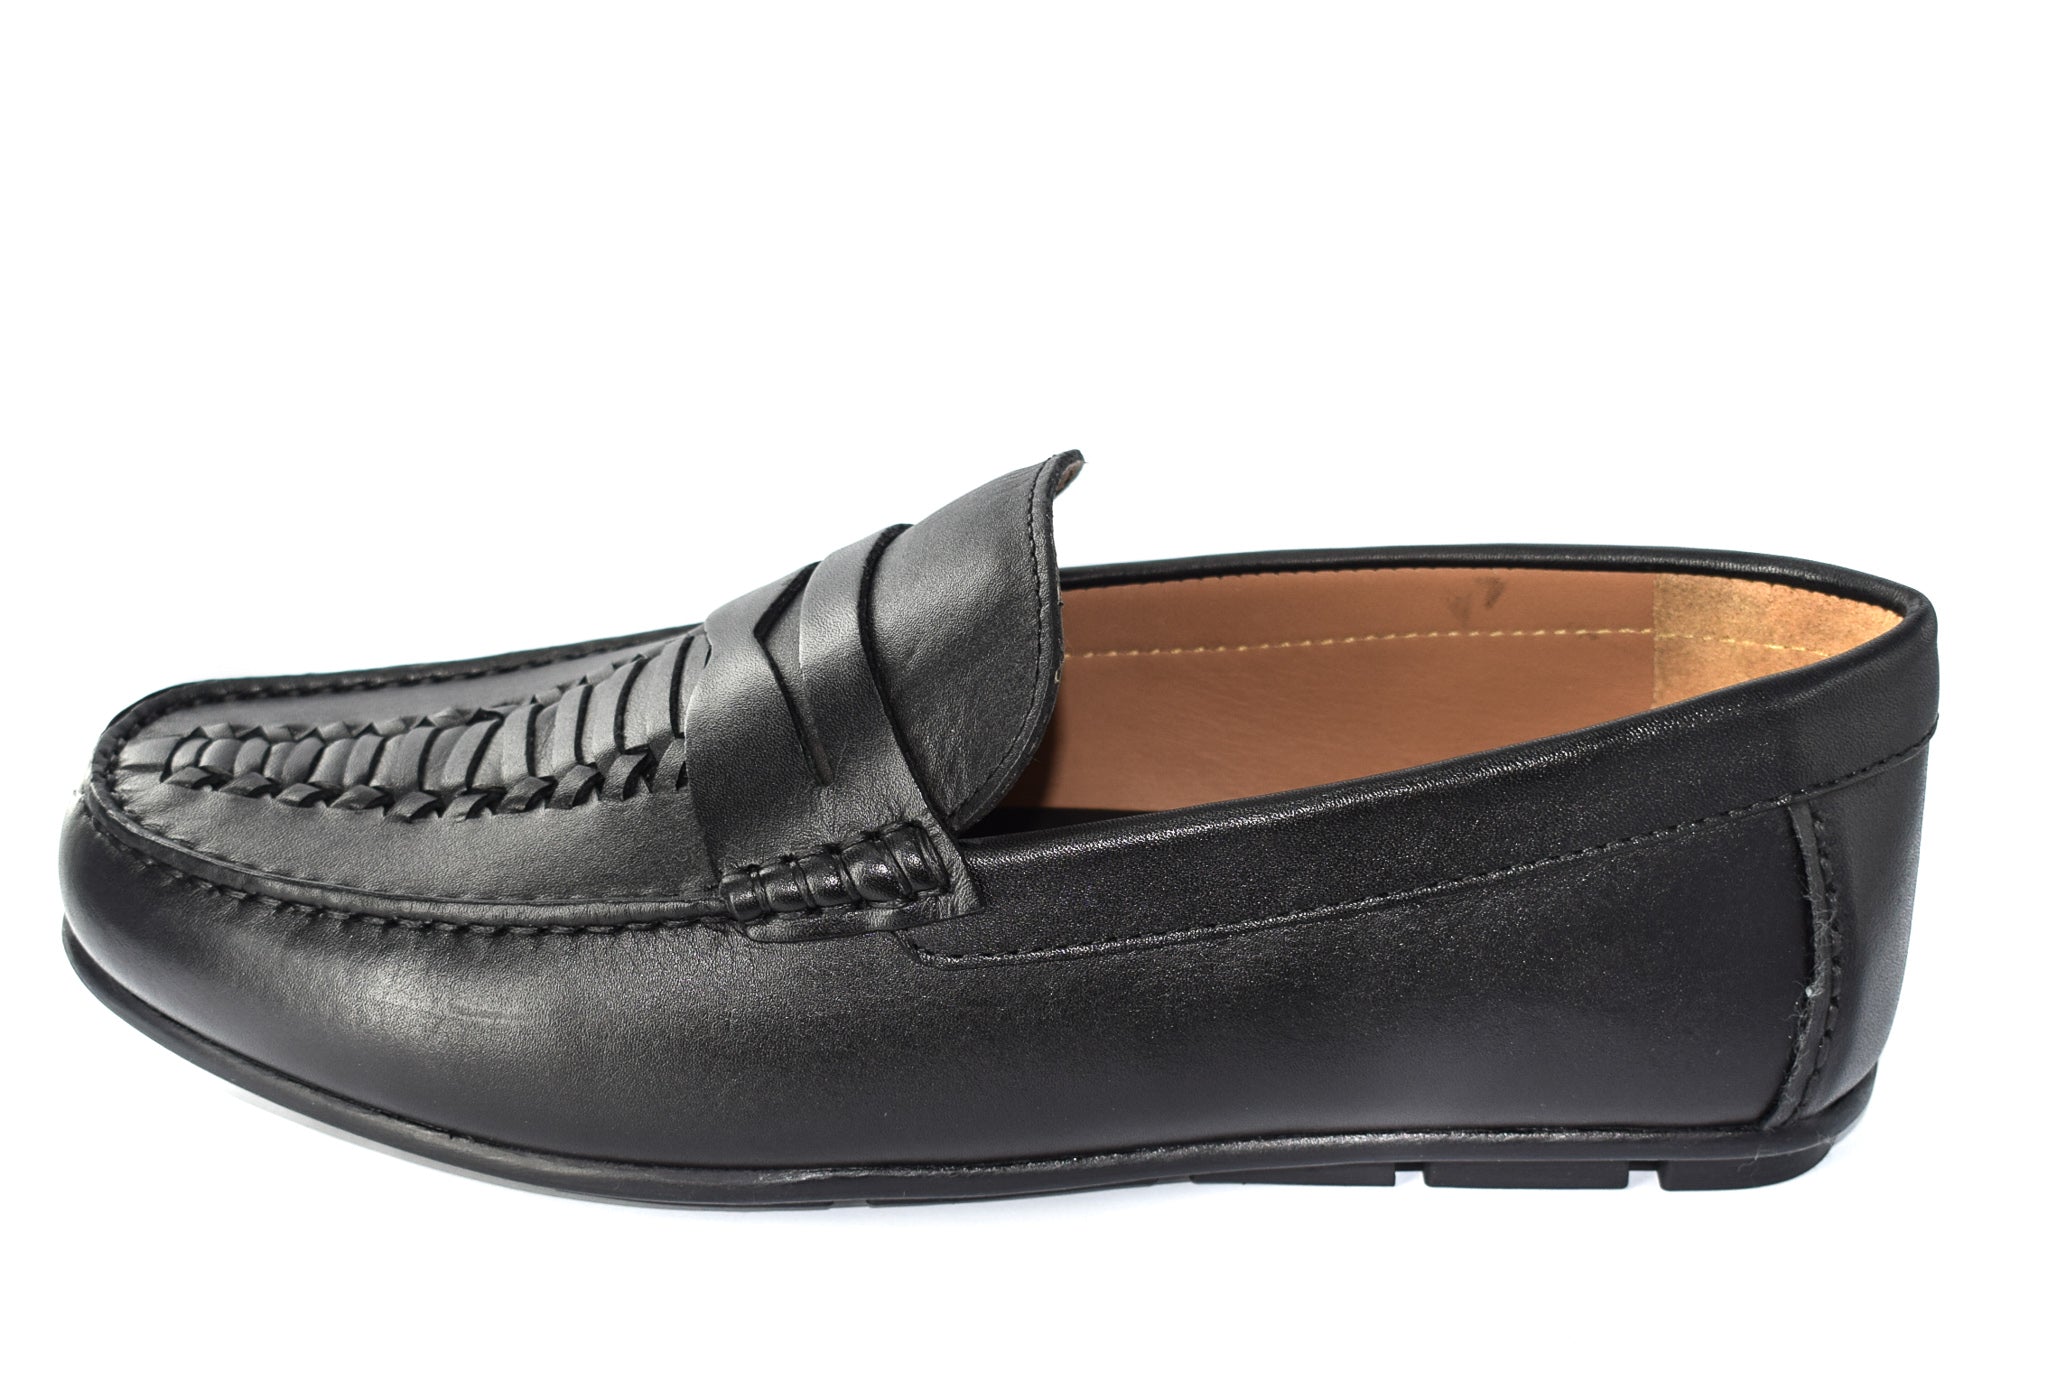 Leisure Shoes Loafers Men Lether Shoes Mens Black Dress Leather